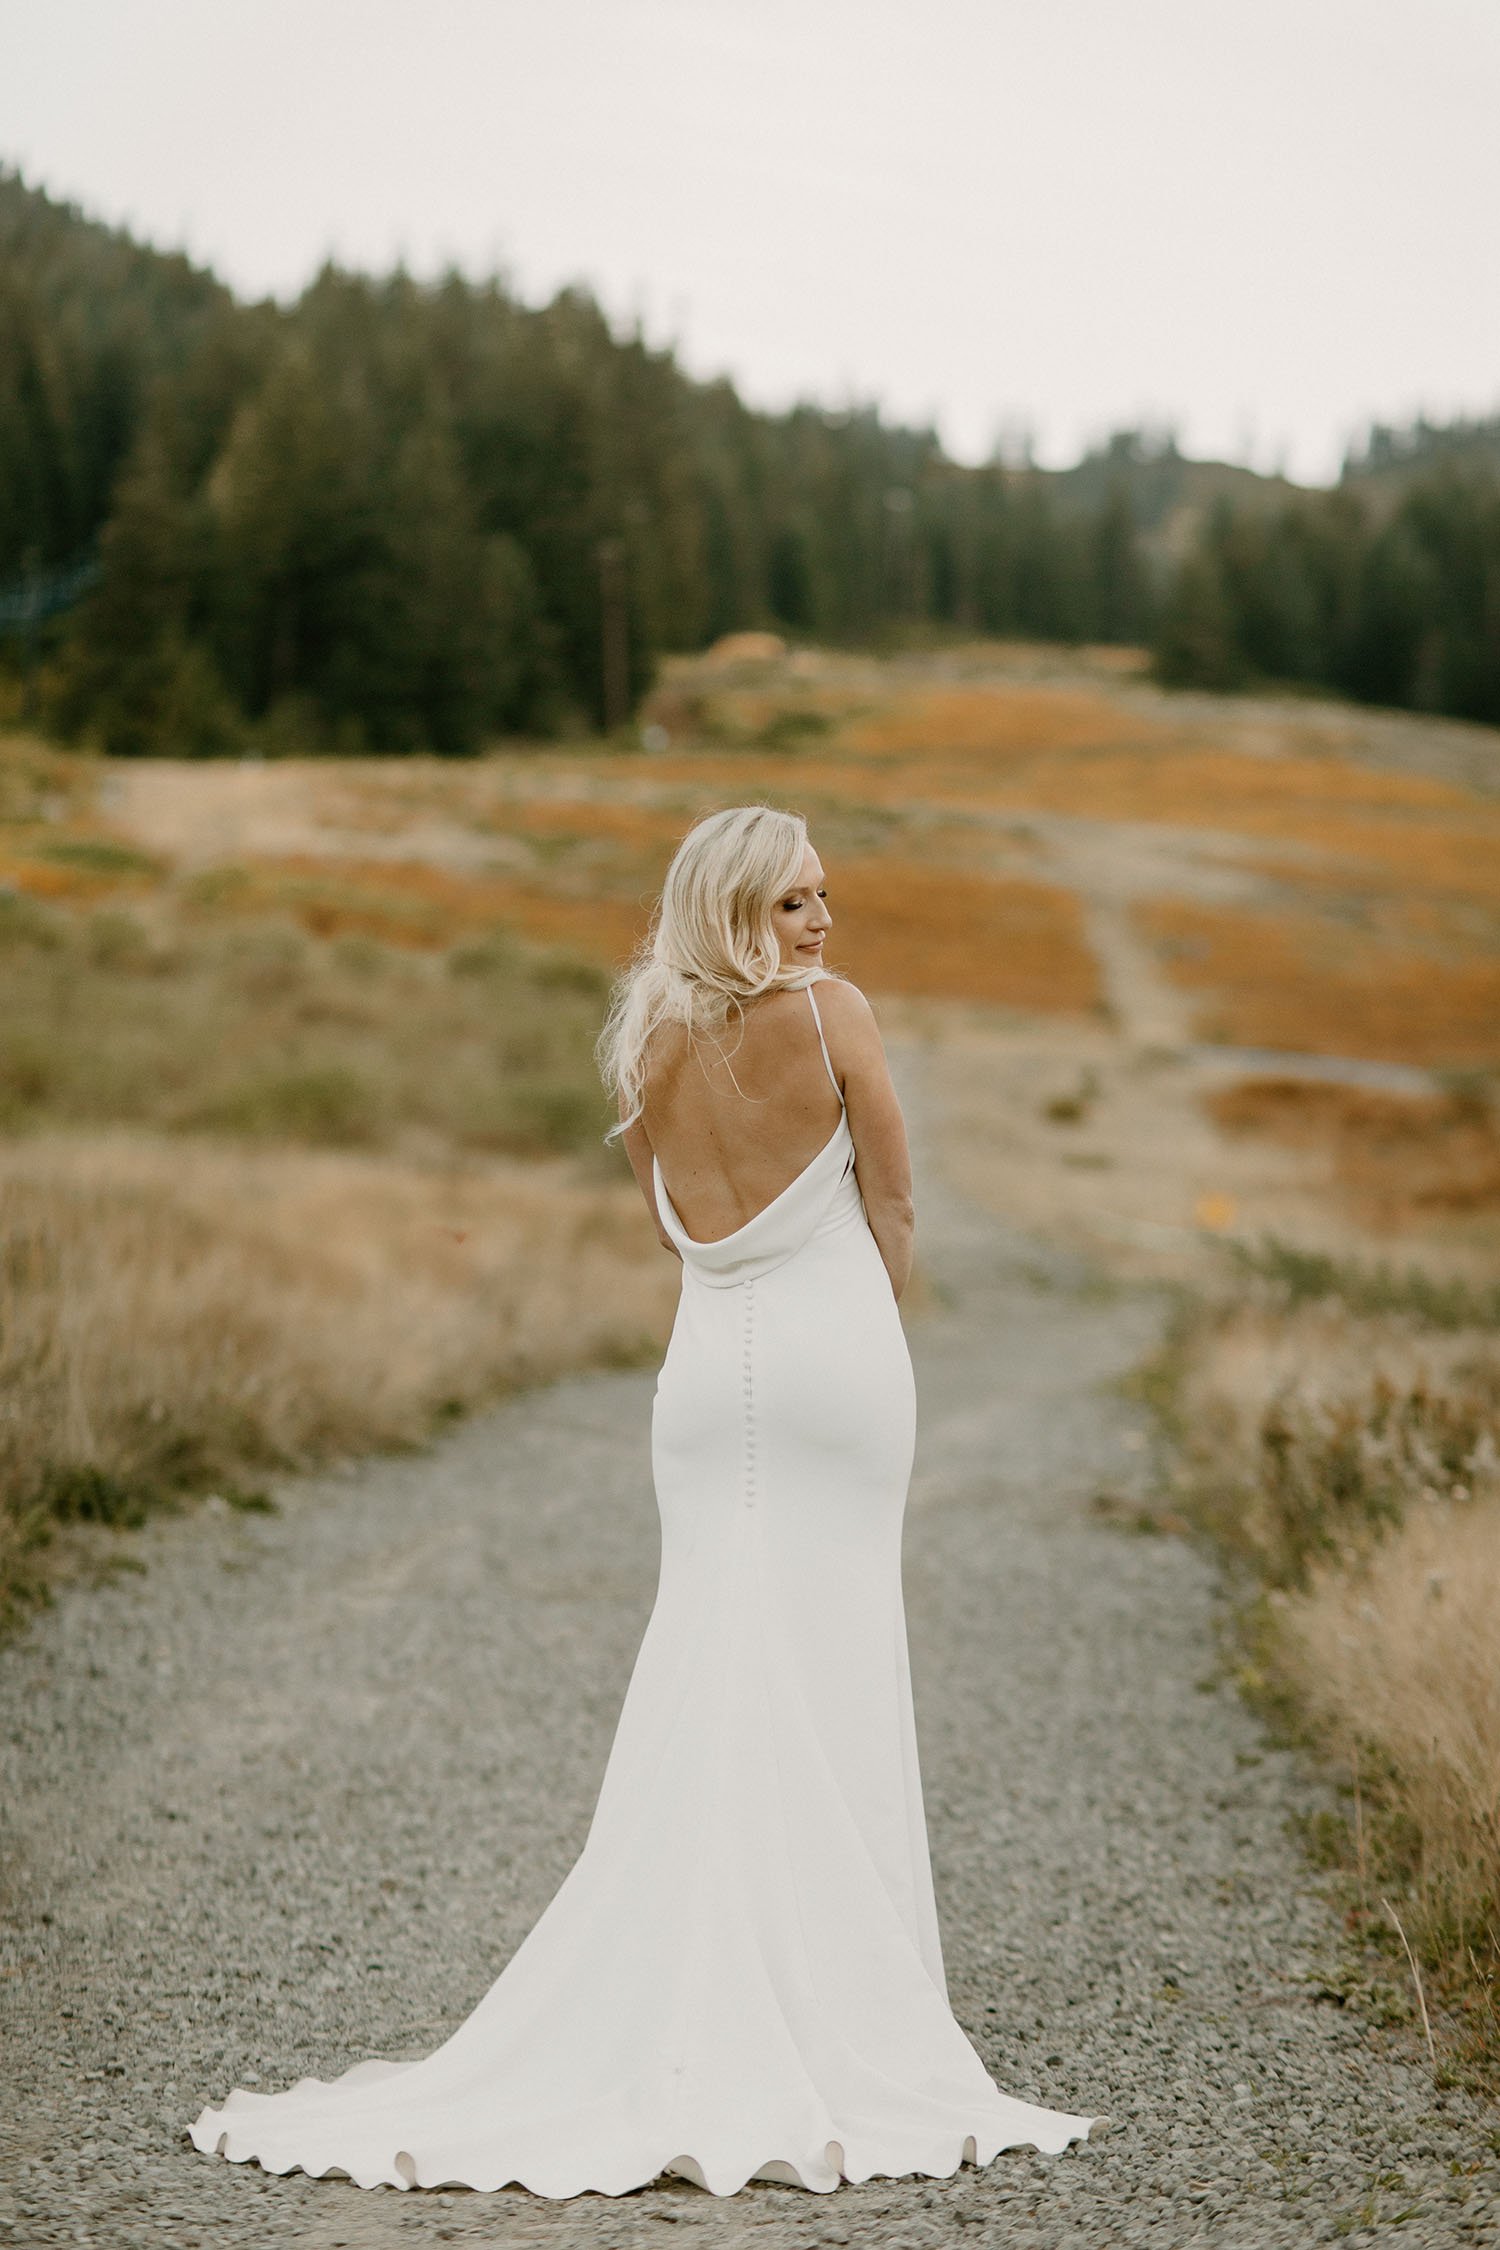 Made-With-Love-Archie-Wedding-Dress-Real-Bride-Rachael-04.jpeg